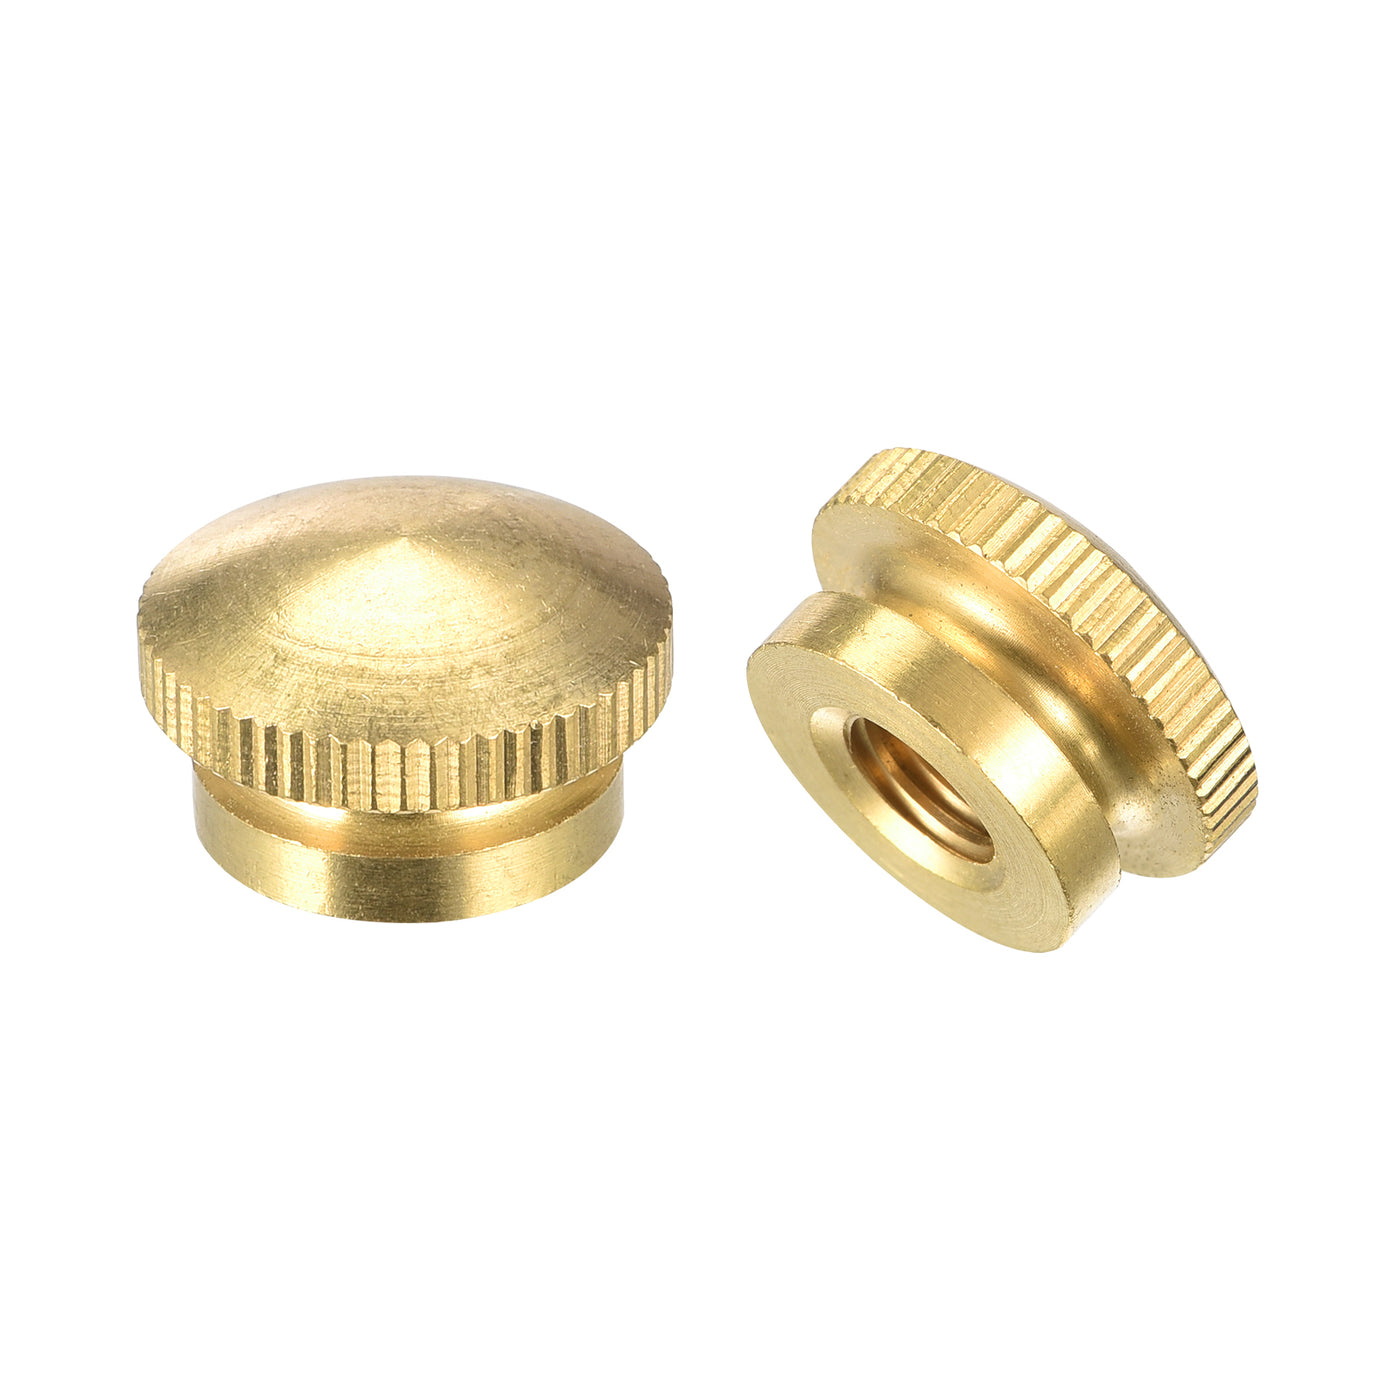 uxcell Uxcell Brass Knurled Thumb Nuts, M8x1.25mm Round Stepped Knobs Fasteners for 3D Printer, Electronic Equipment 2Pcs